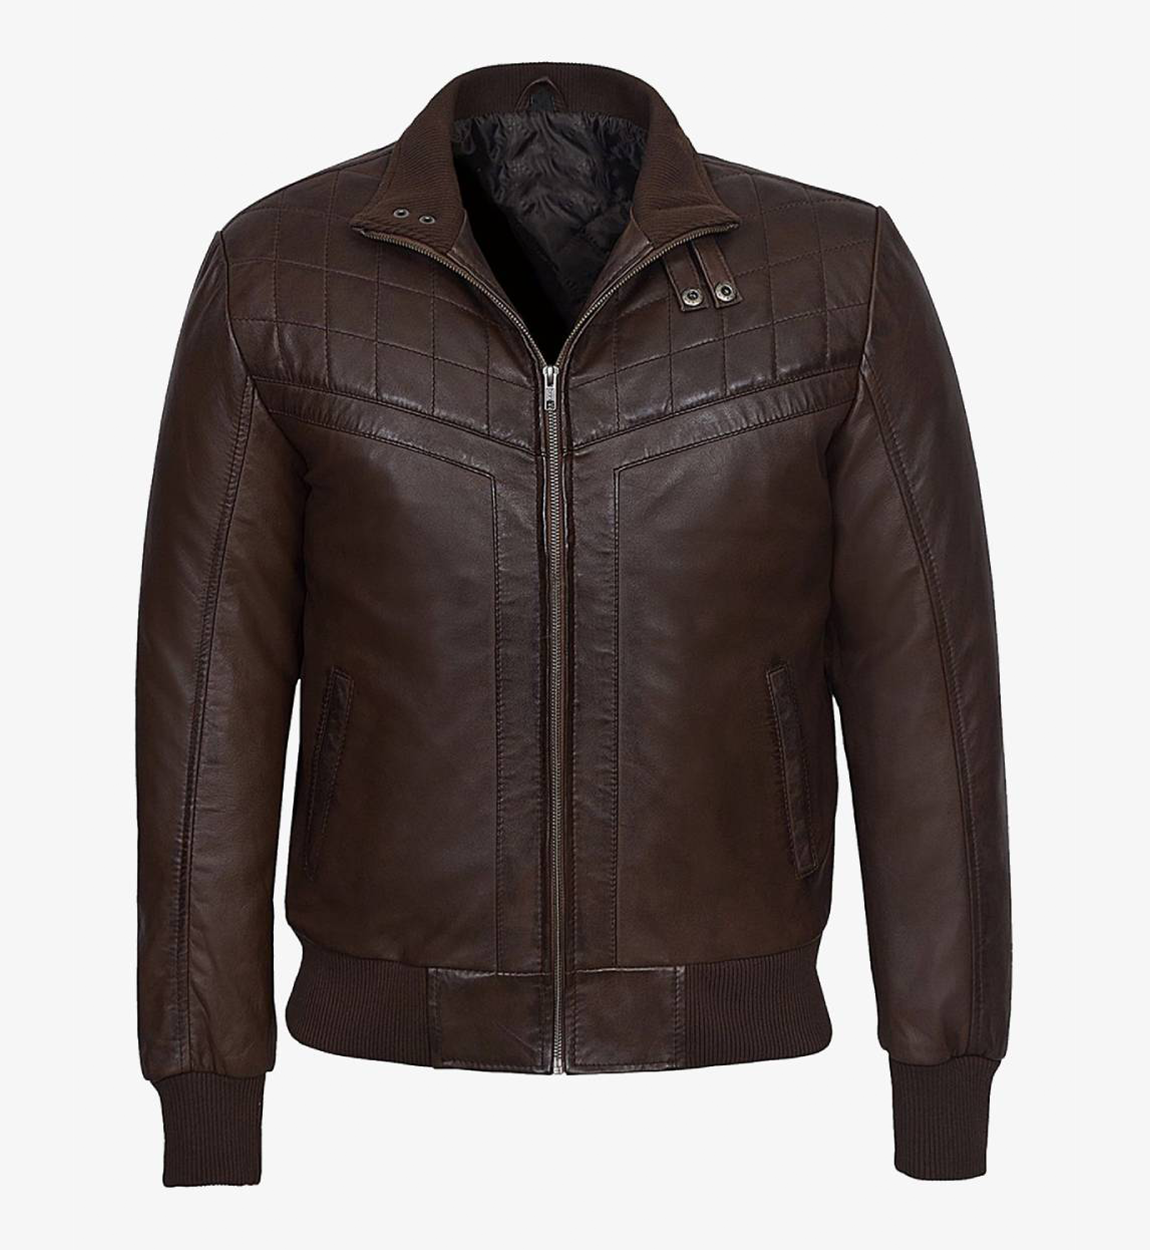 Men's Quilted Brown Retro Bomber Leather Jacket